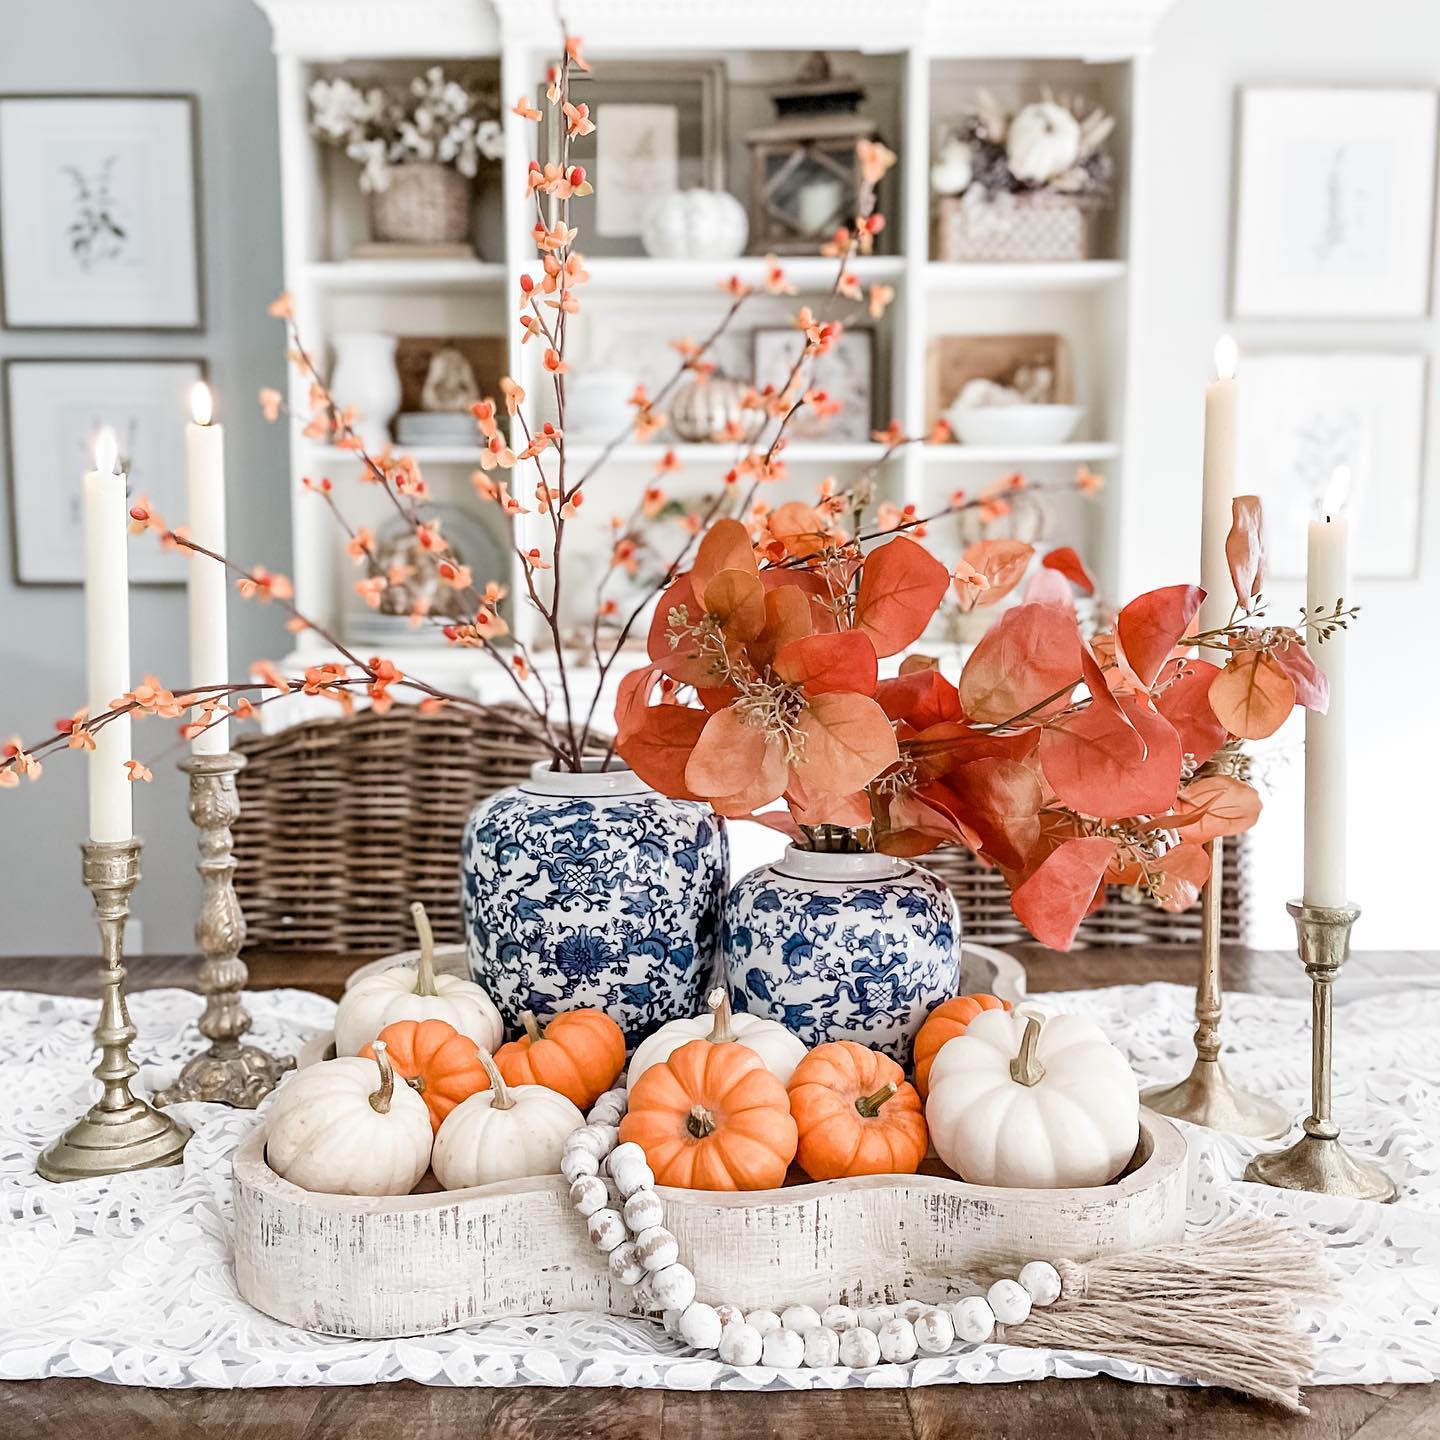 Fall centerpiece with pumpkins, candles, and fall foliage. Photo by Instagram user @bloom_jennybrooks. 